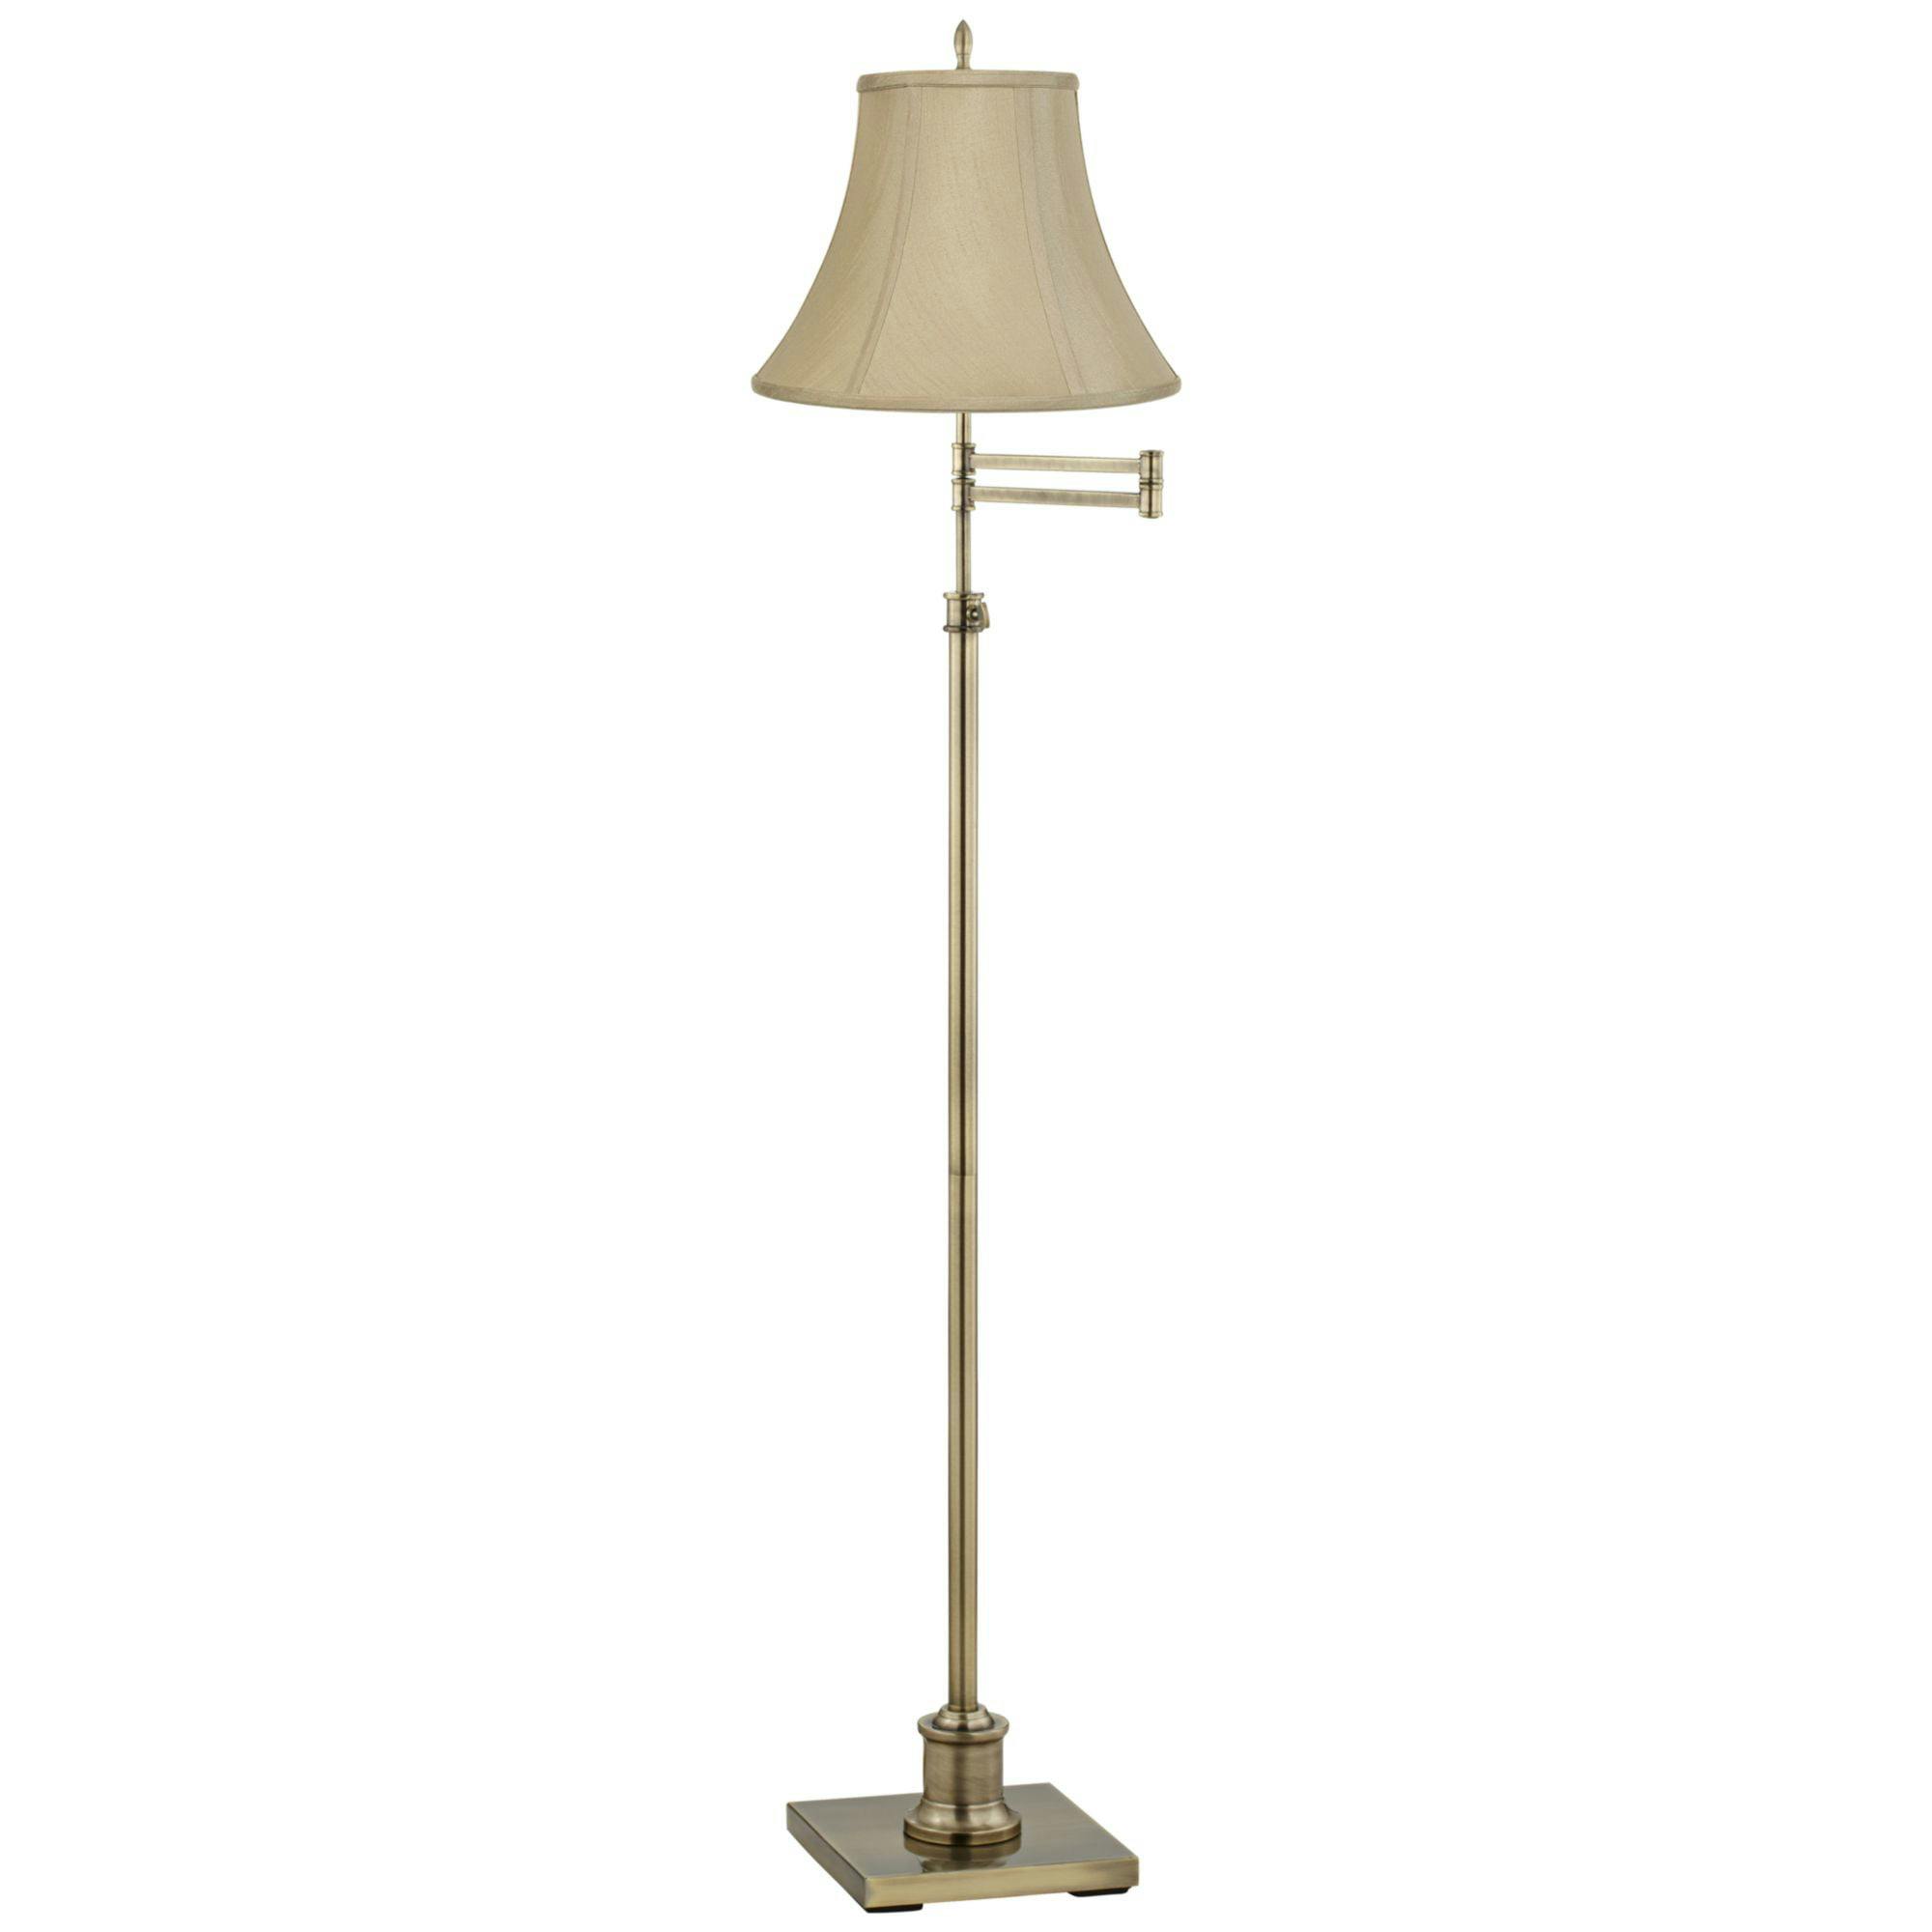 Antique Brass Finish Adjustable Floor Lamp with Taupe Fabric Bell Shade